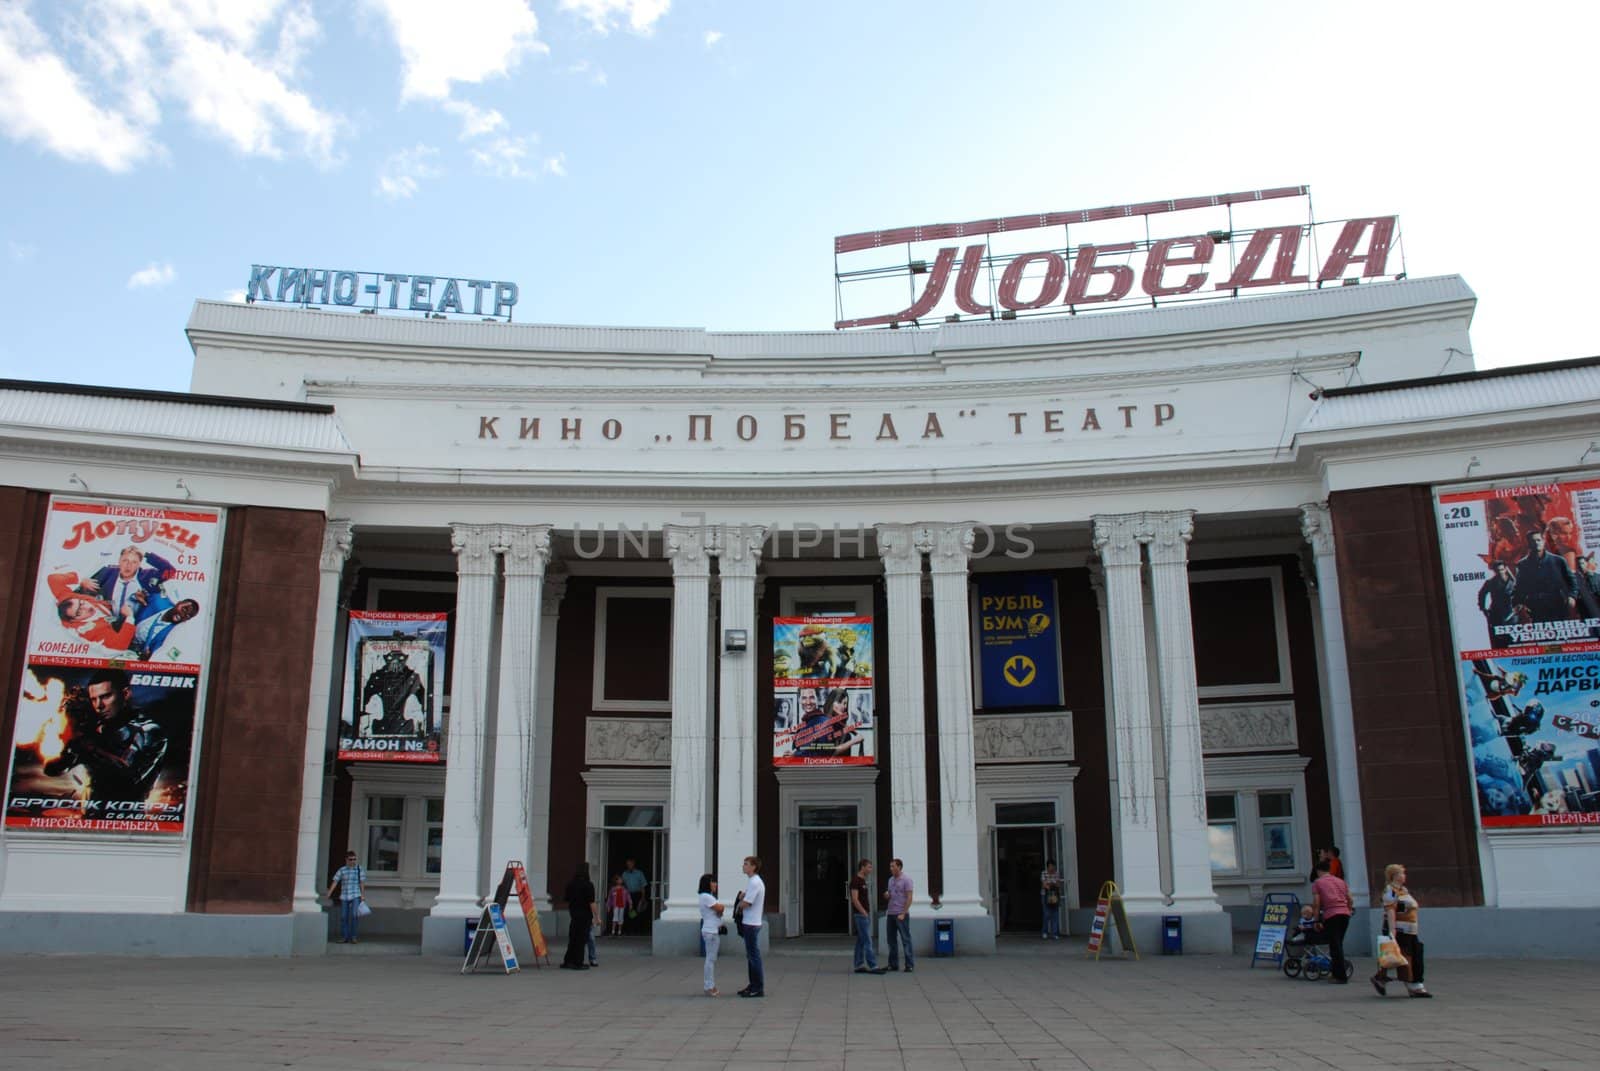 The building of the cinema "Pobeda" ("Victory") by Light